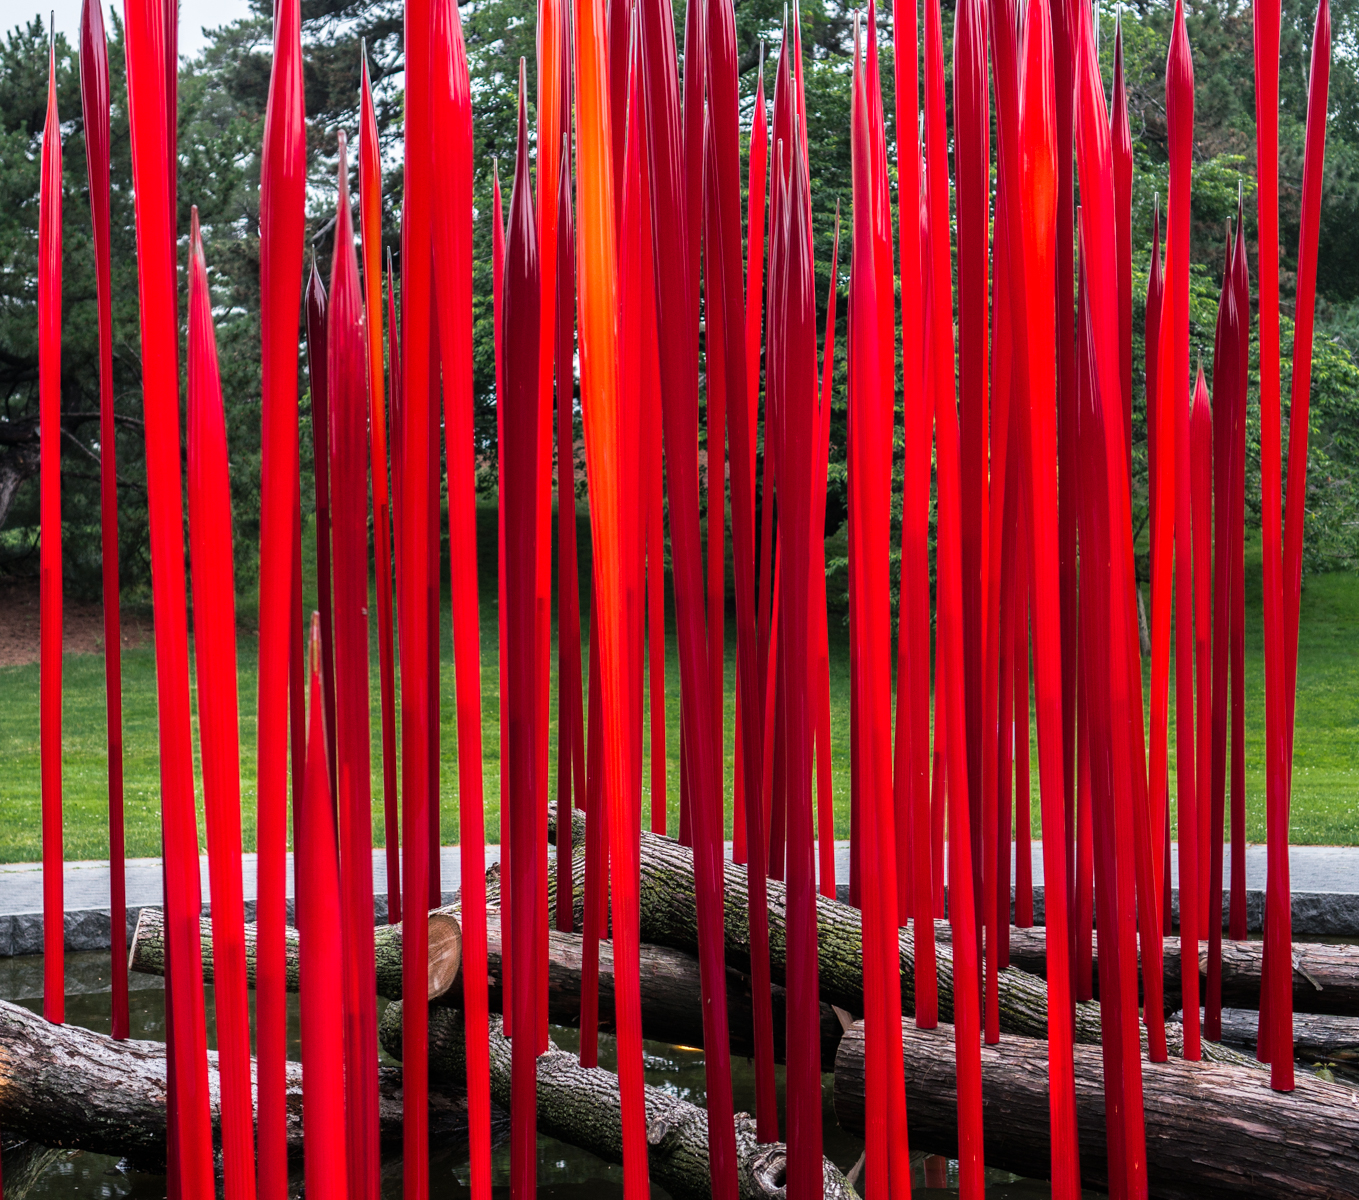 Dale Chihuly glass sculpture RED REEDS ON LOGS at the New York Botanical Garden (2017) | Photo by Mike Hudak